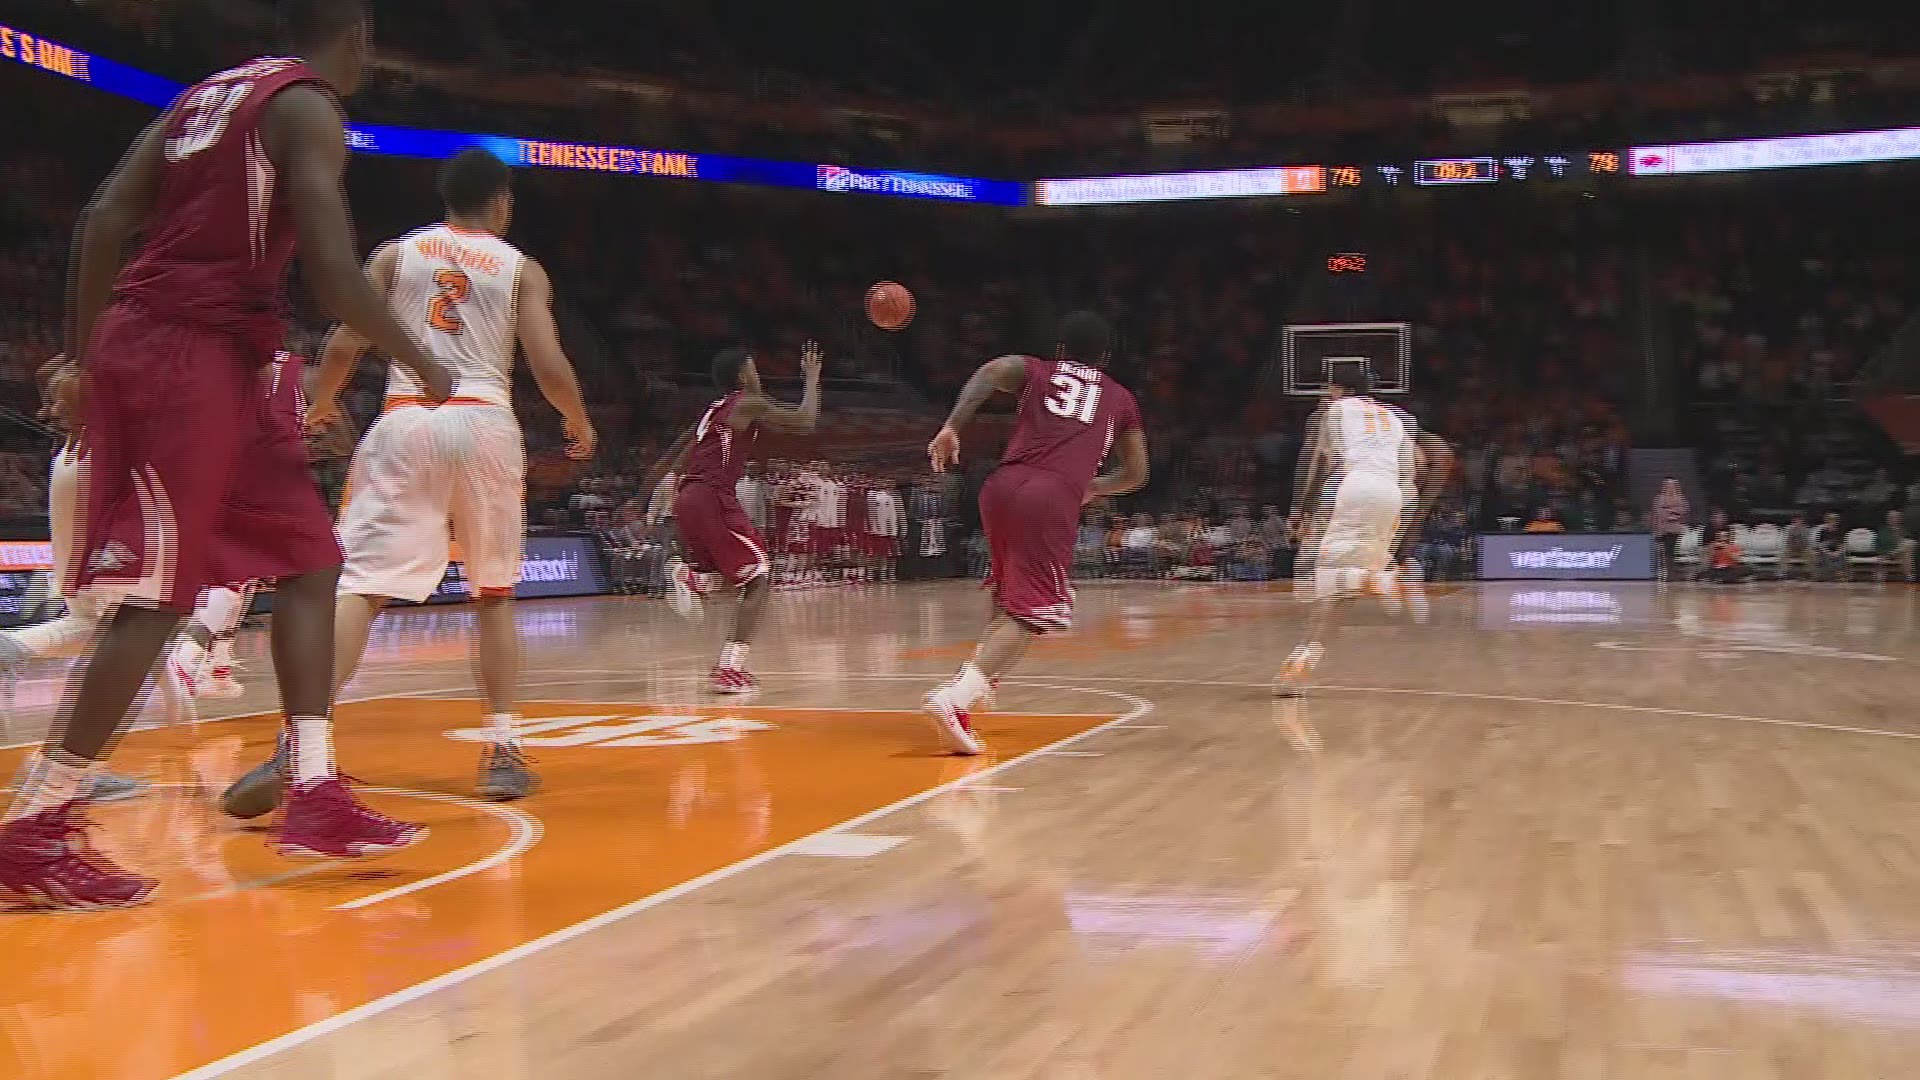 With the Vols trailing by three with less than 20 seconds left, Detrick Mostella drove to the bucket and missed a layup. Mostella finished with 16 points and one assist in the Vols loss to Arkansas.